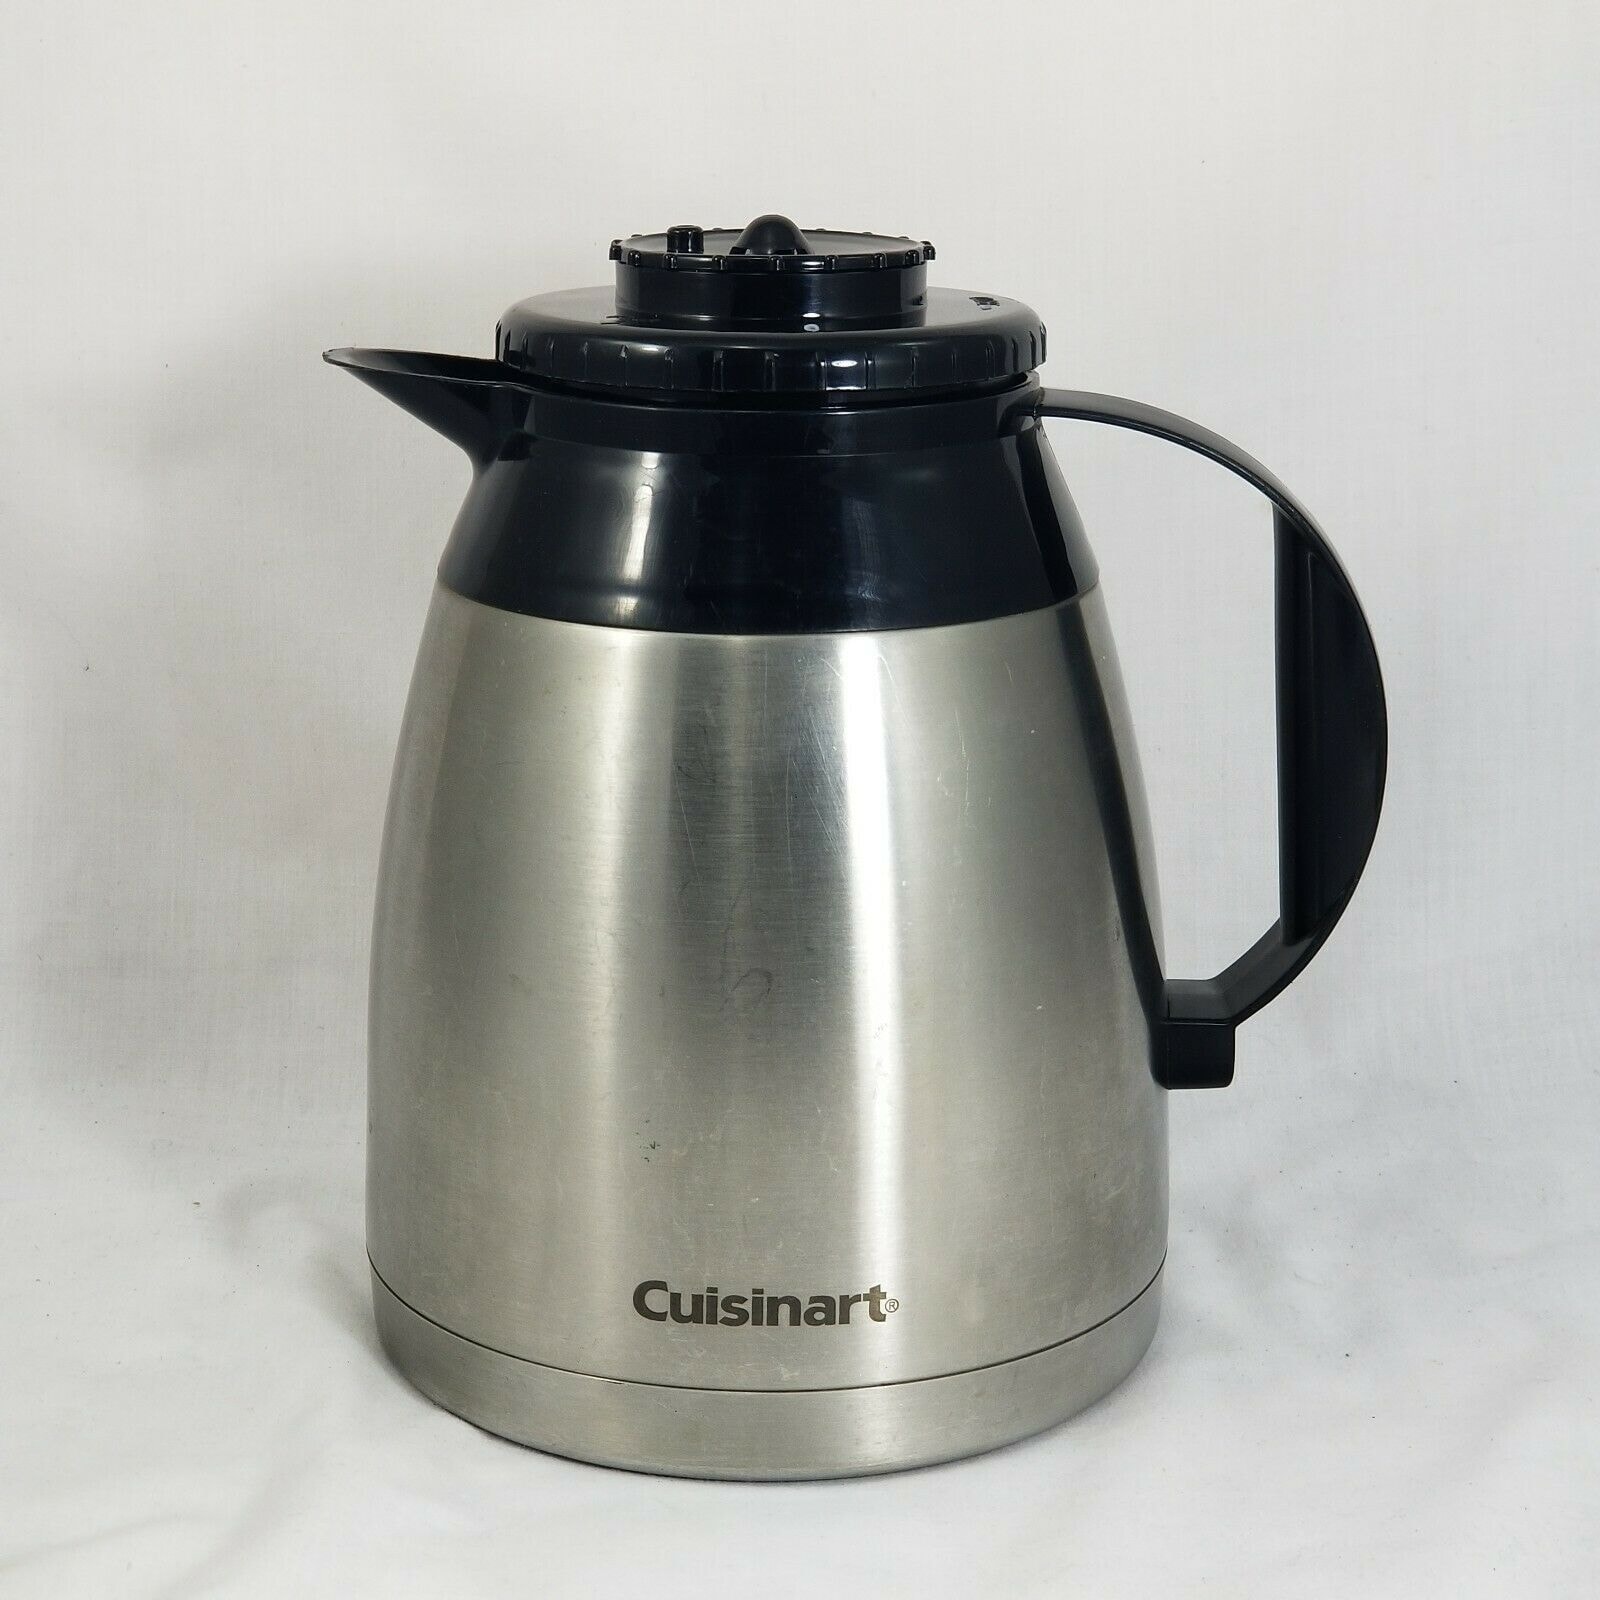 https://ak1.ostkcdn.com/images/products/is/images/direct/e20e9a28dea42d8f53c32f55ef34d6cf9d607749/Cuisinart-DTC-975TC12BSS-STAINLESS-STEEL-THERMAL-CARAFE-BLACK.jpg